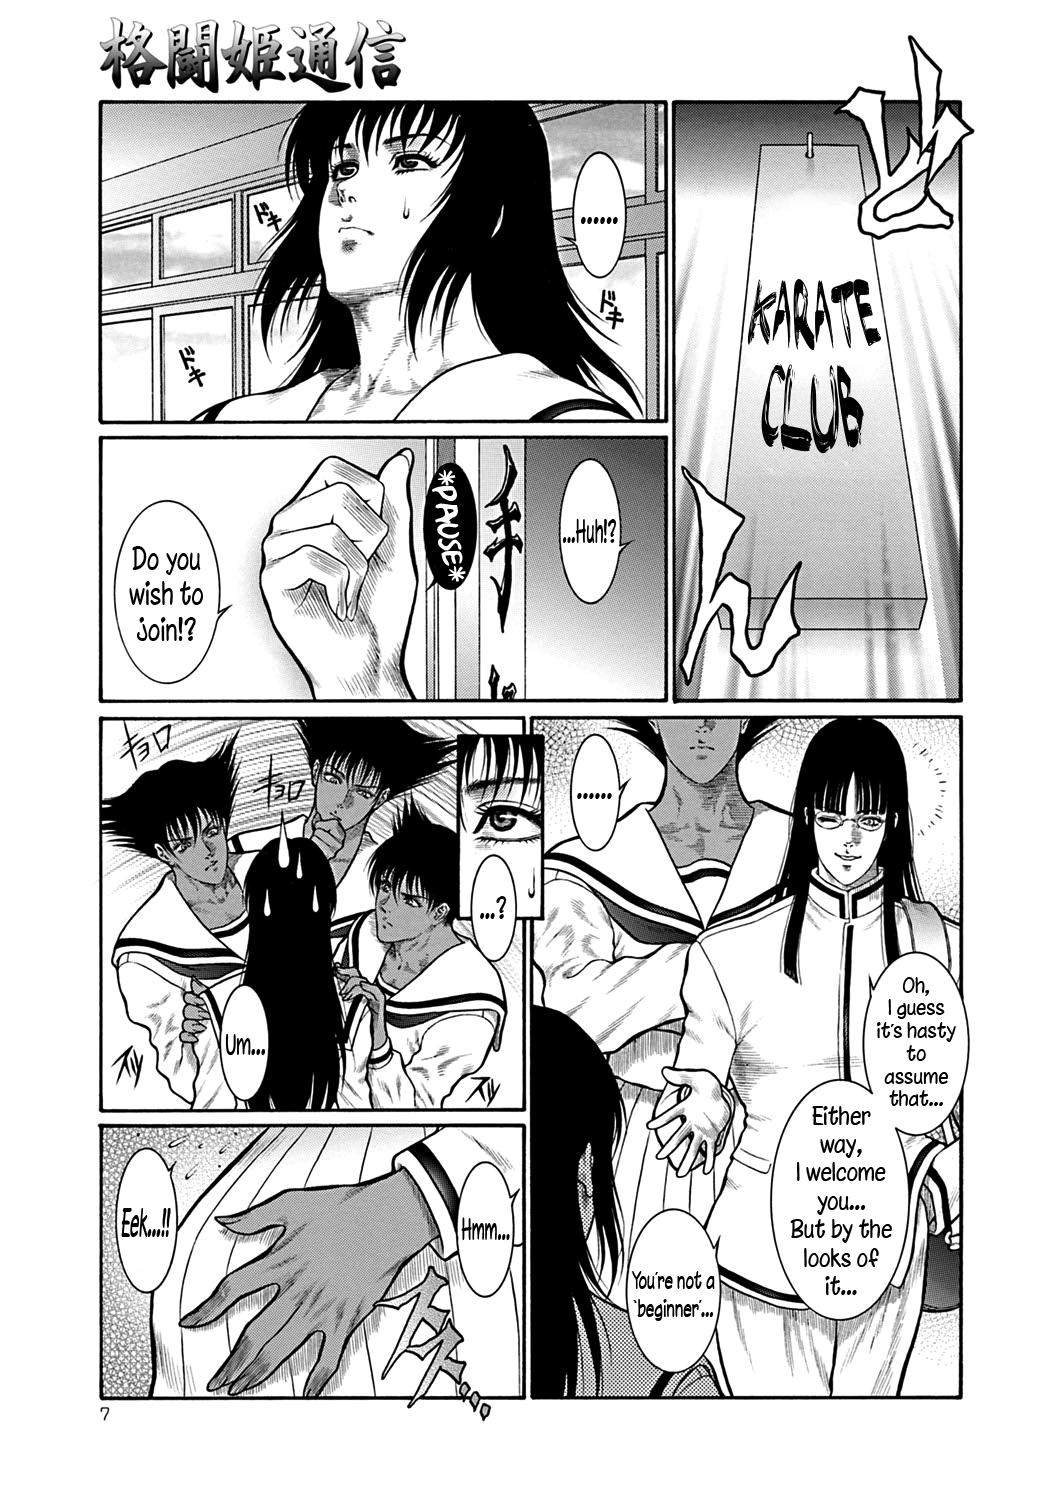 First Time Moujuu Chuui Gen Ch. 1-8 Family Roleplay - Page 6